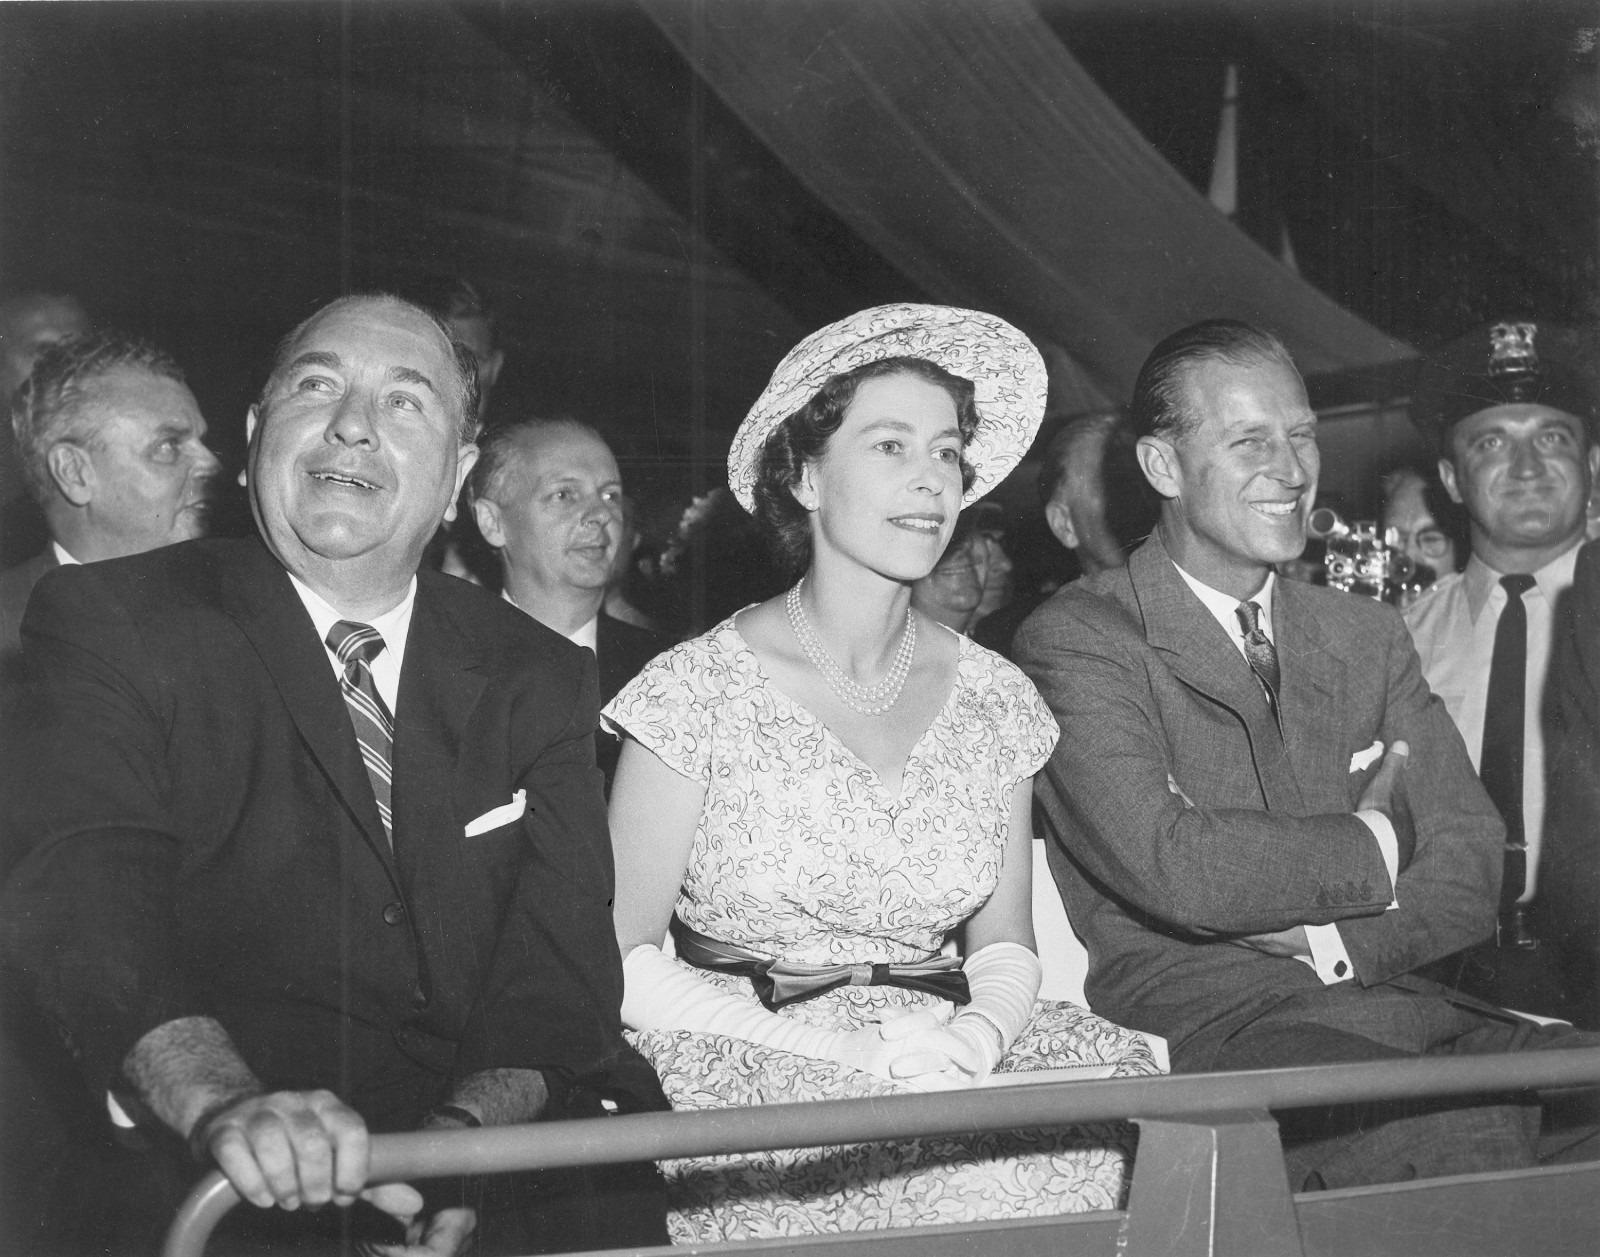 A look back on the time Queen Elizabeth visited Chicago in 1959 ...